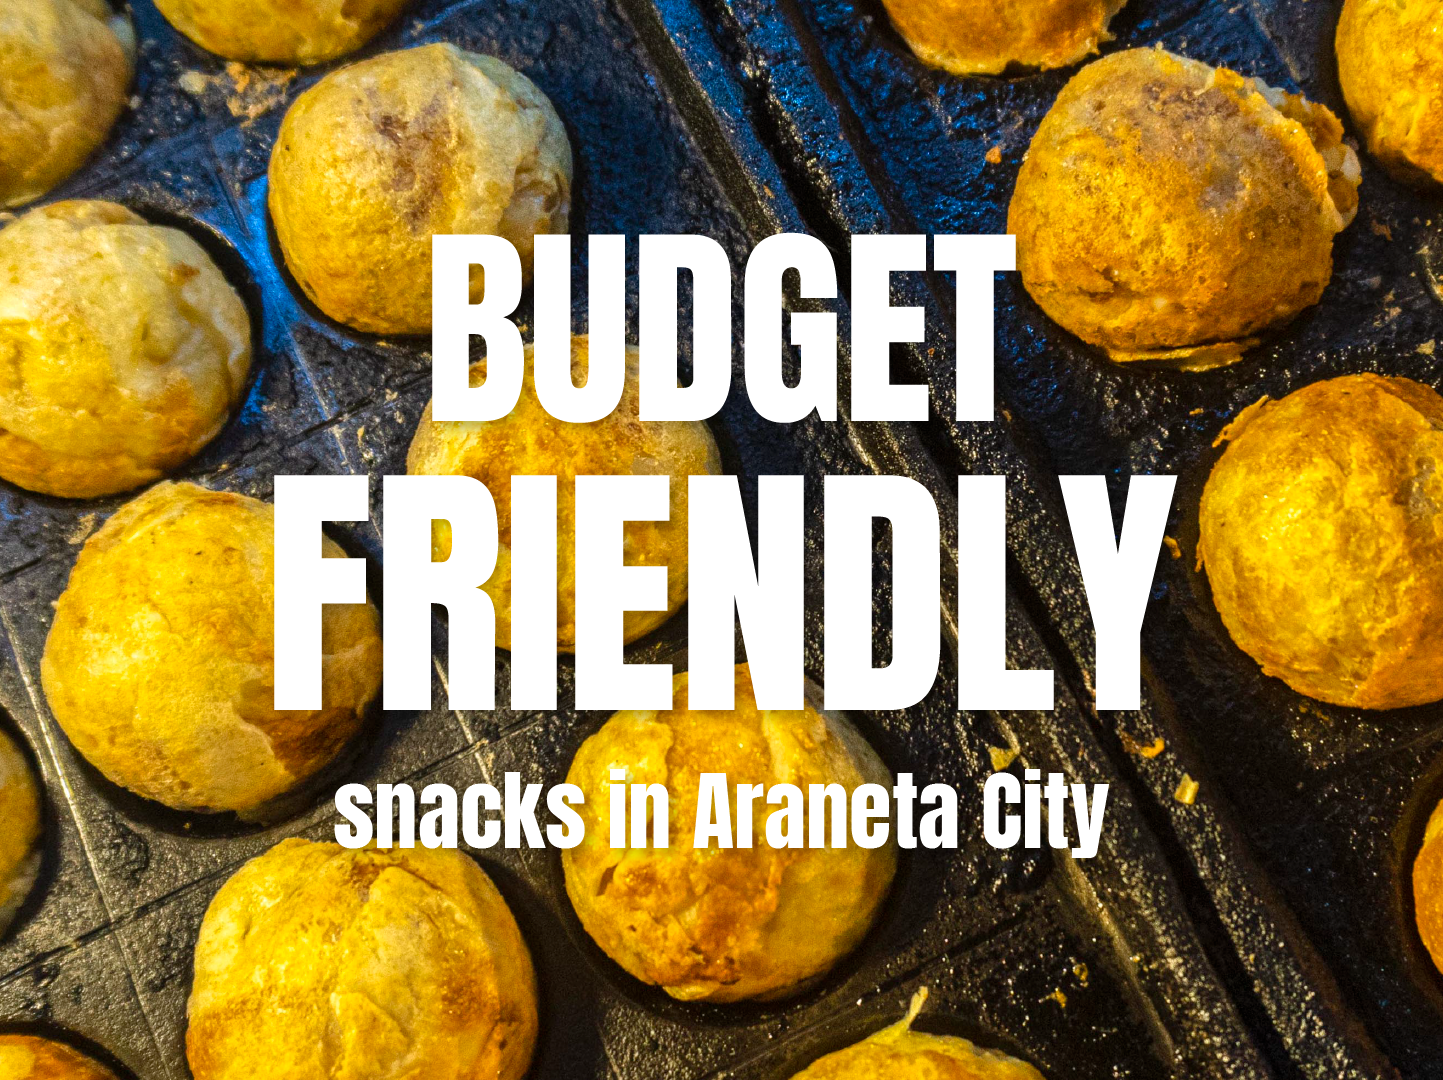 Budget-friendly snacks in Araneta City for people on the go!